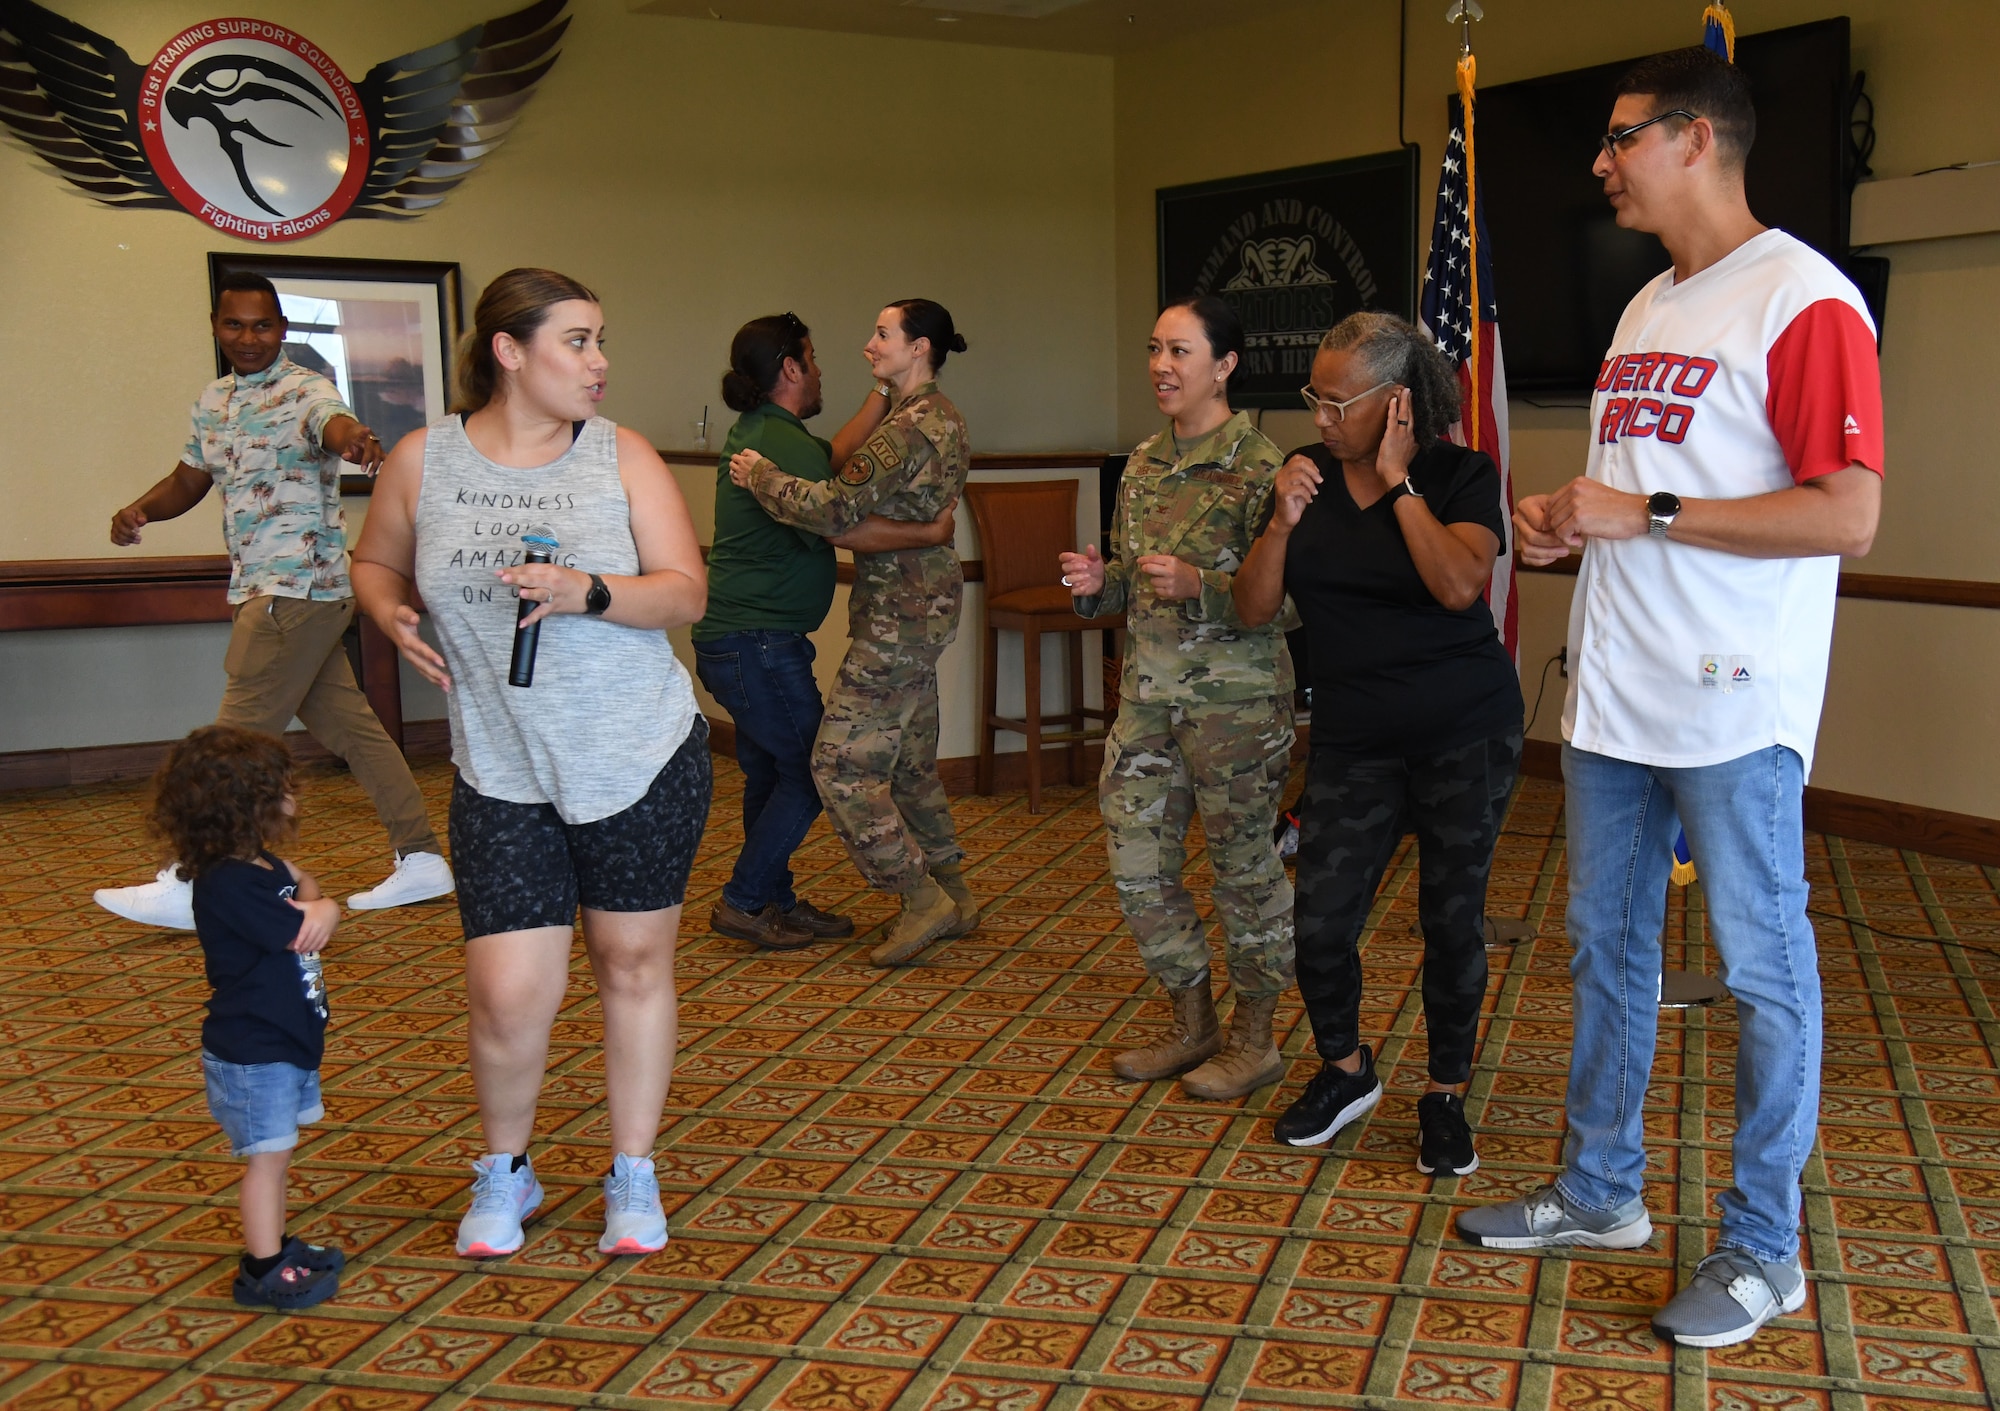 Keesler personnel participate in dance lessons during the Hispanic Heritage Month event inside the Bay Breeze Event Center at Keesler Air Force Base, Mississippi, Sept. 23, 2022. Dominos were also played during the event. Hispanic Heritage Month is celebrated September 15 through October 15. (U.S. Air Force photo by Kemberly Groue)